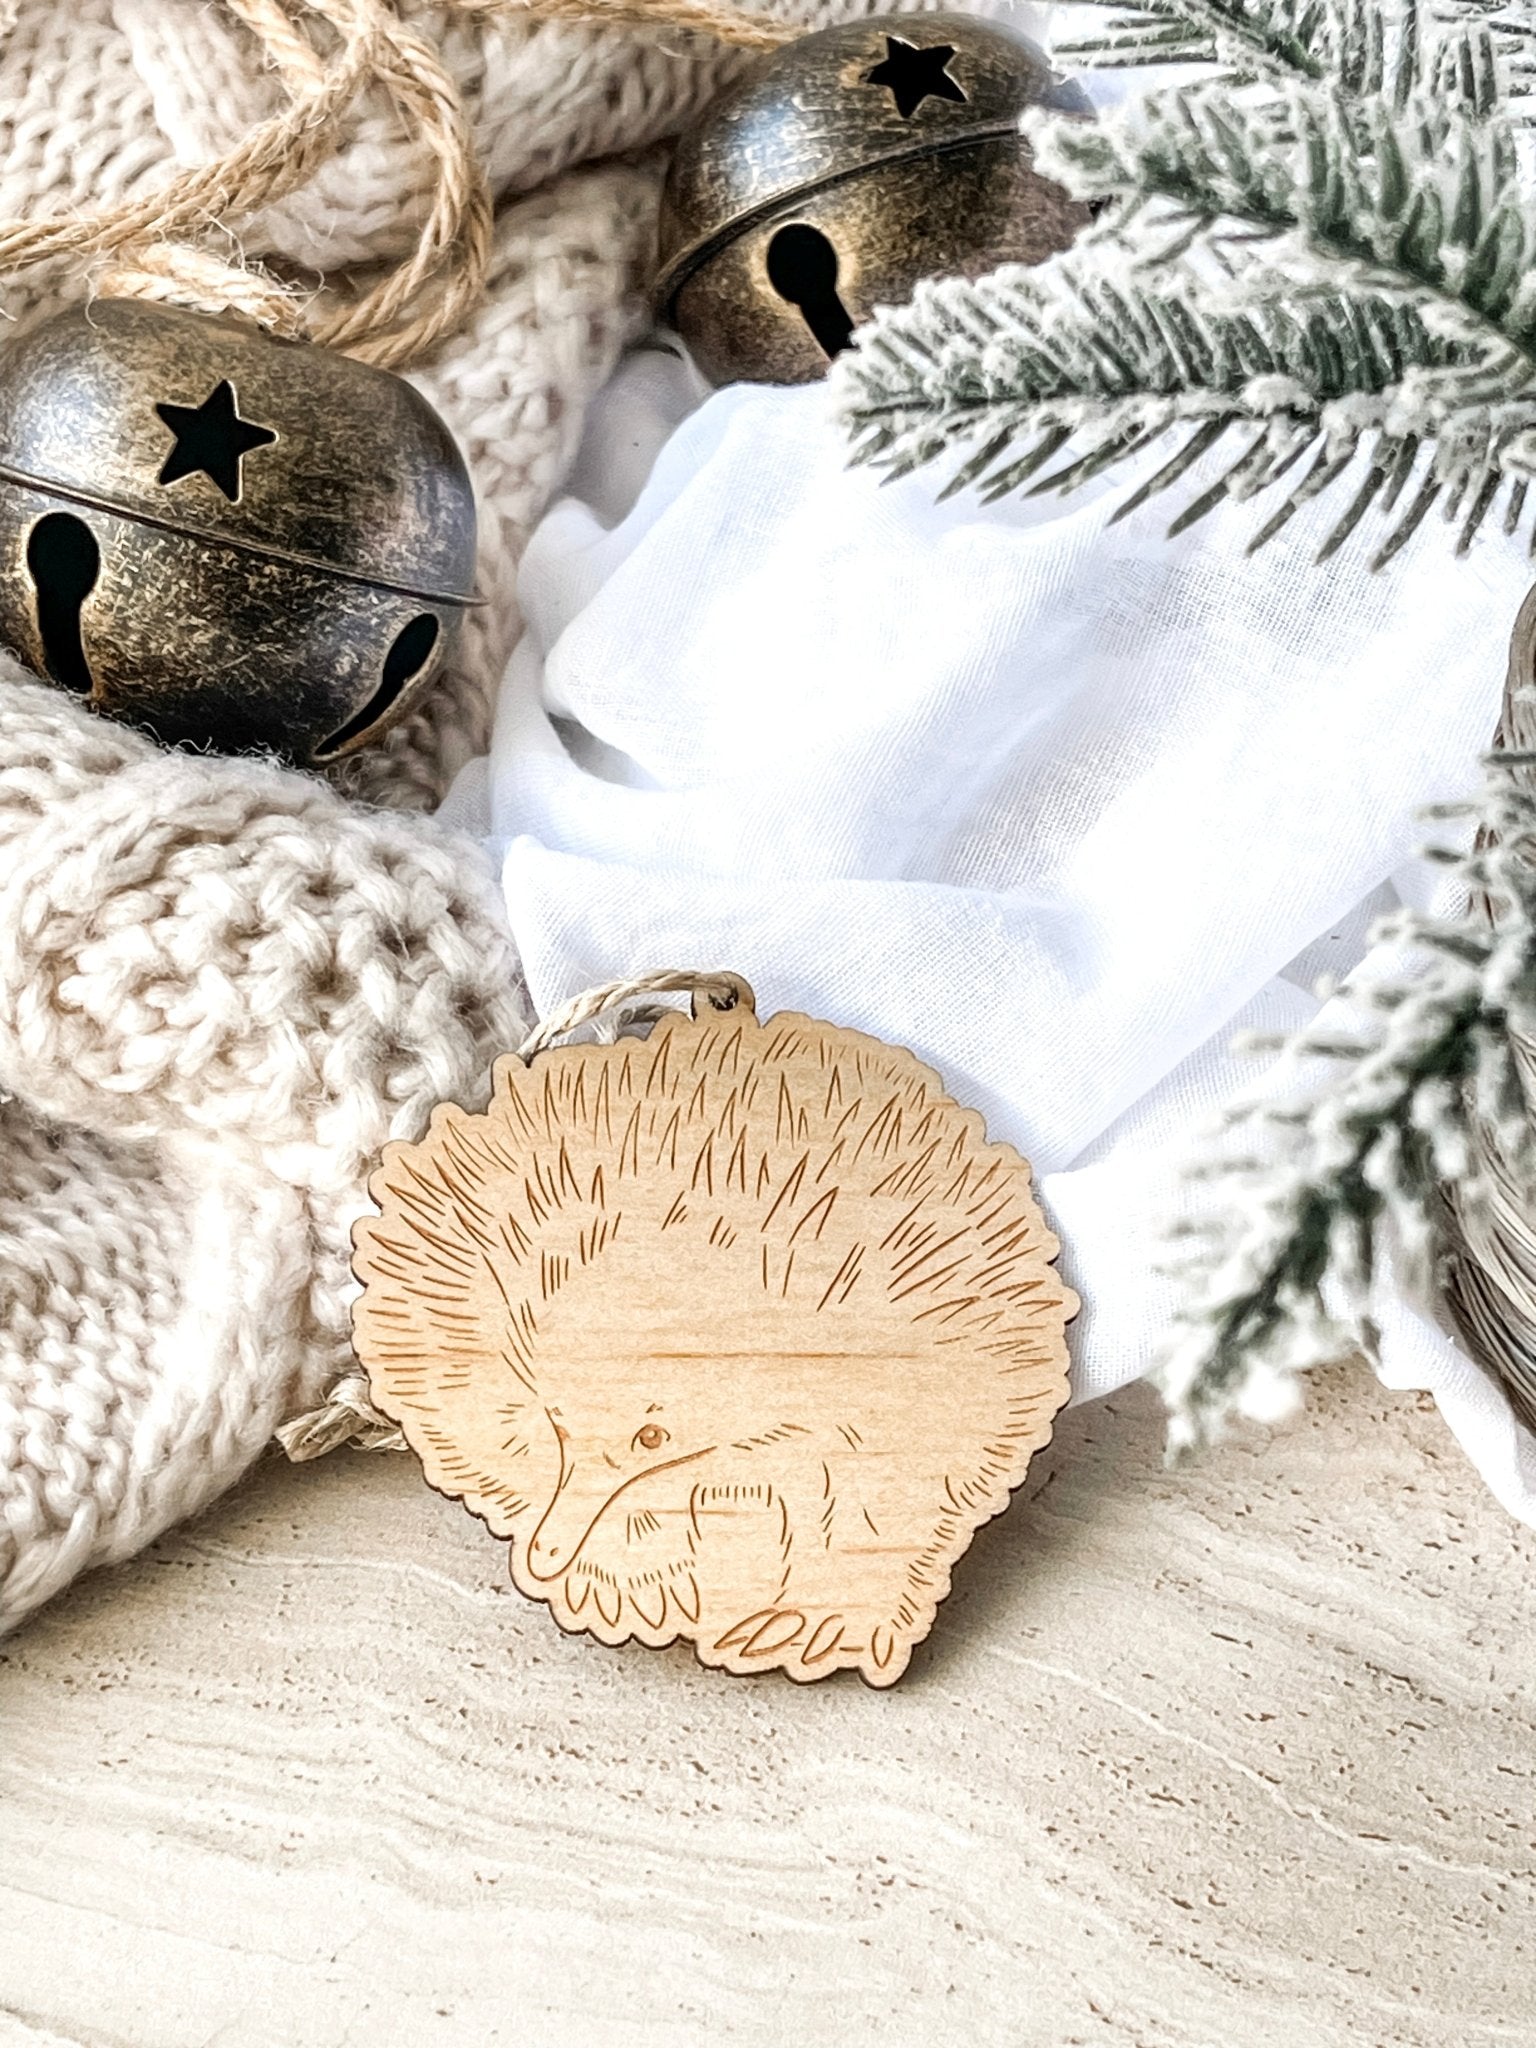 Aussie Animal Ornament - Echidna - The Humble Gift Co.